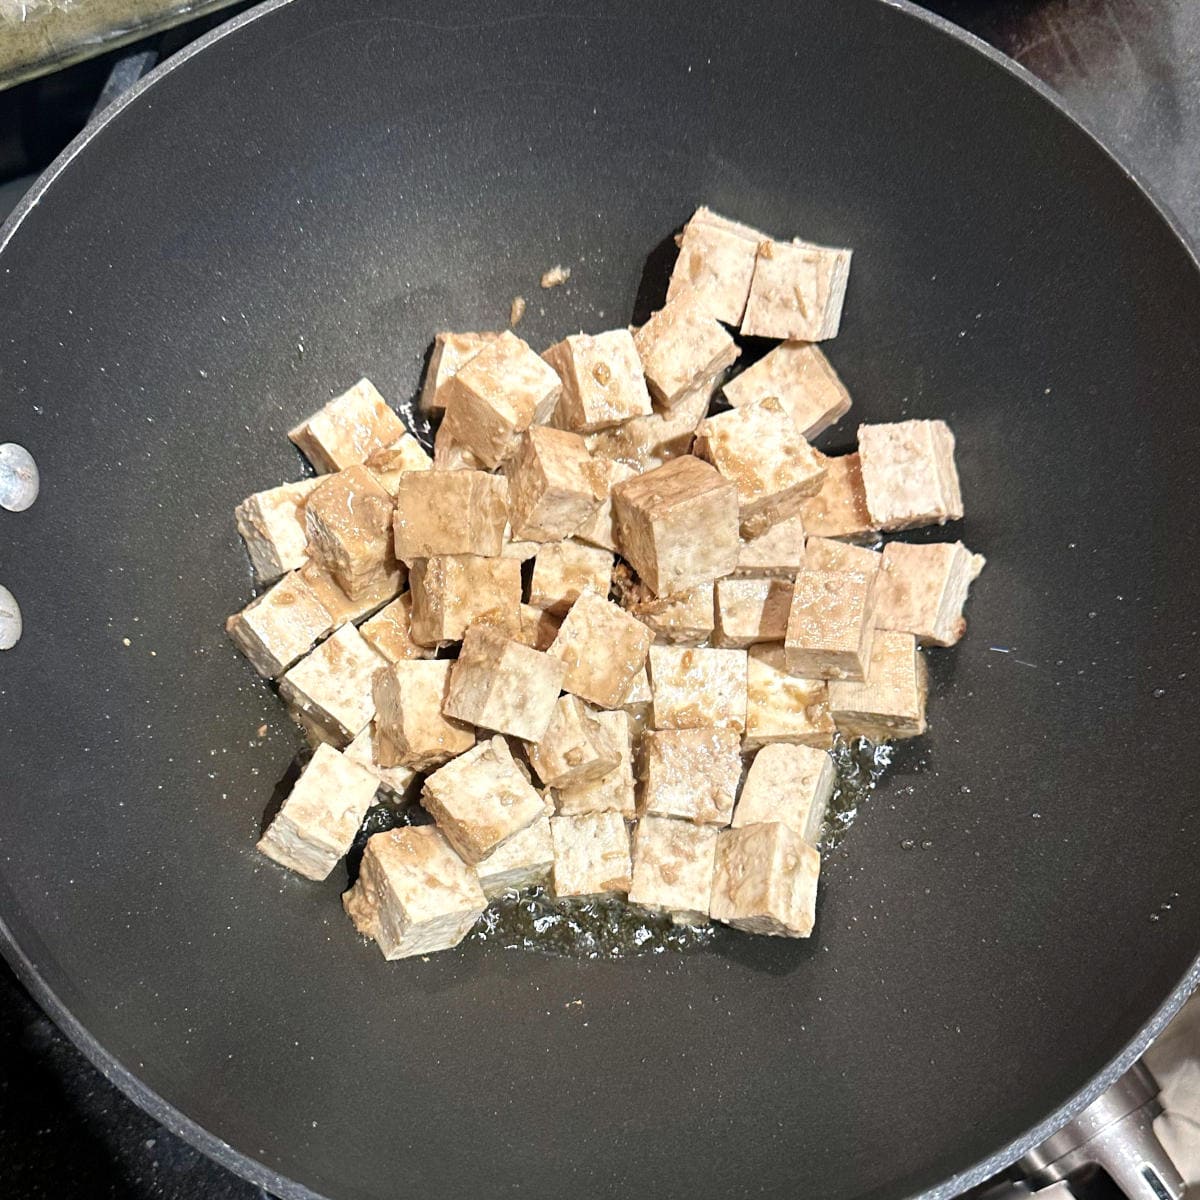 Marinated tofu added to wok for frying.